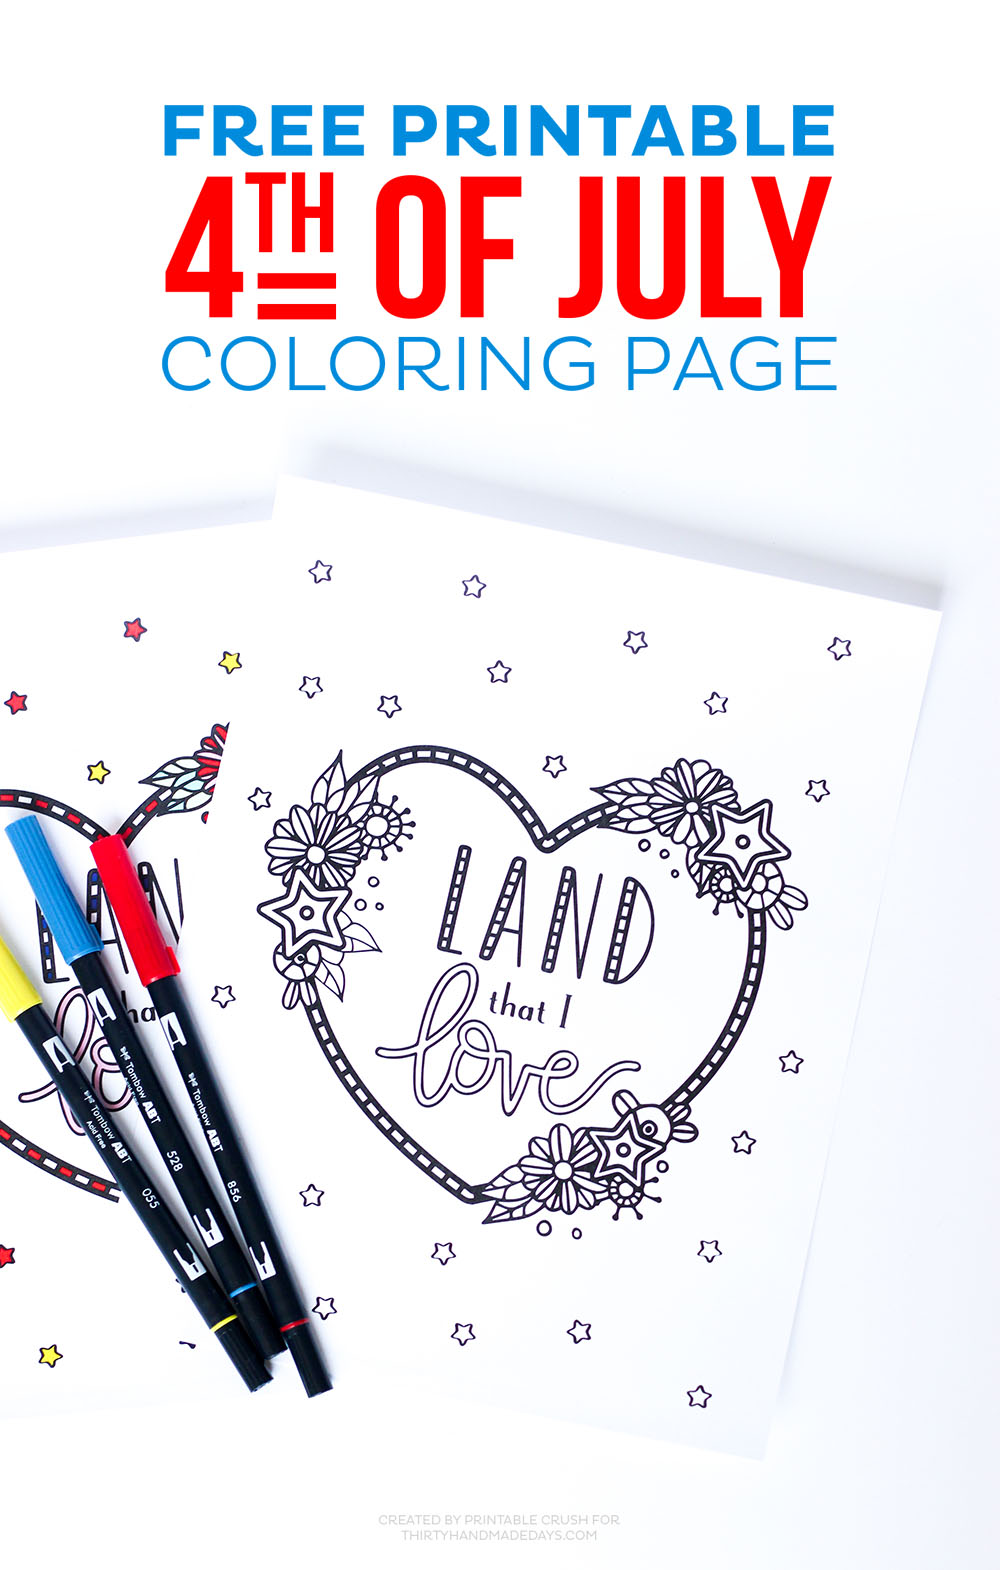 Download this pretty FREE Printable Fourth of July Coloring Page for your kids or for guests at your Independence Day party!